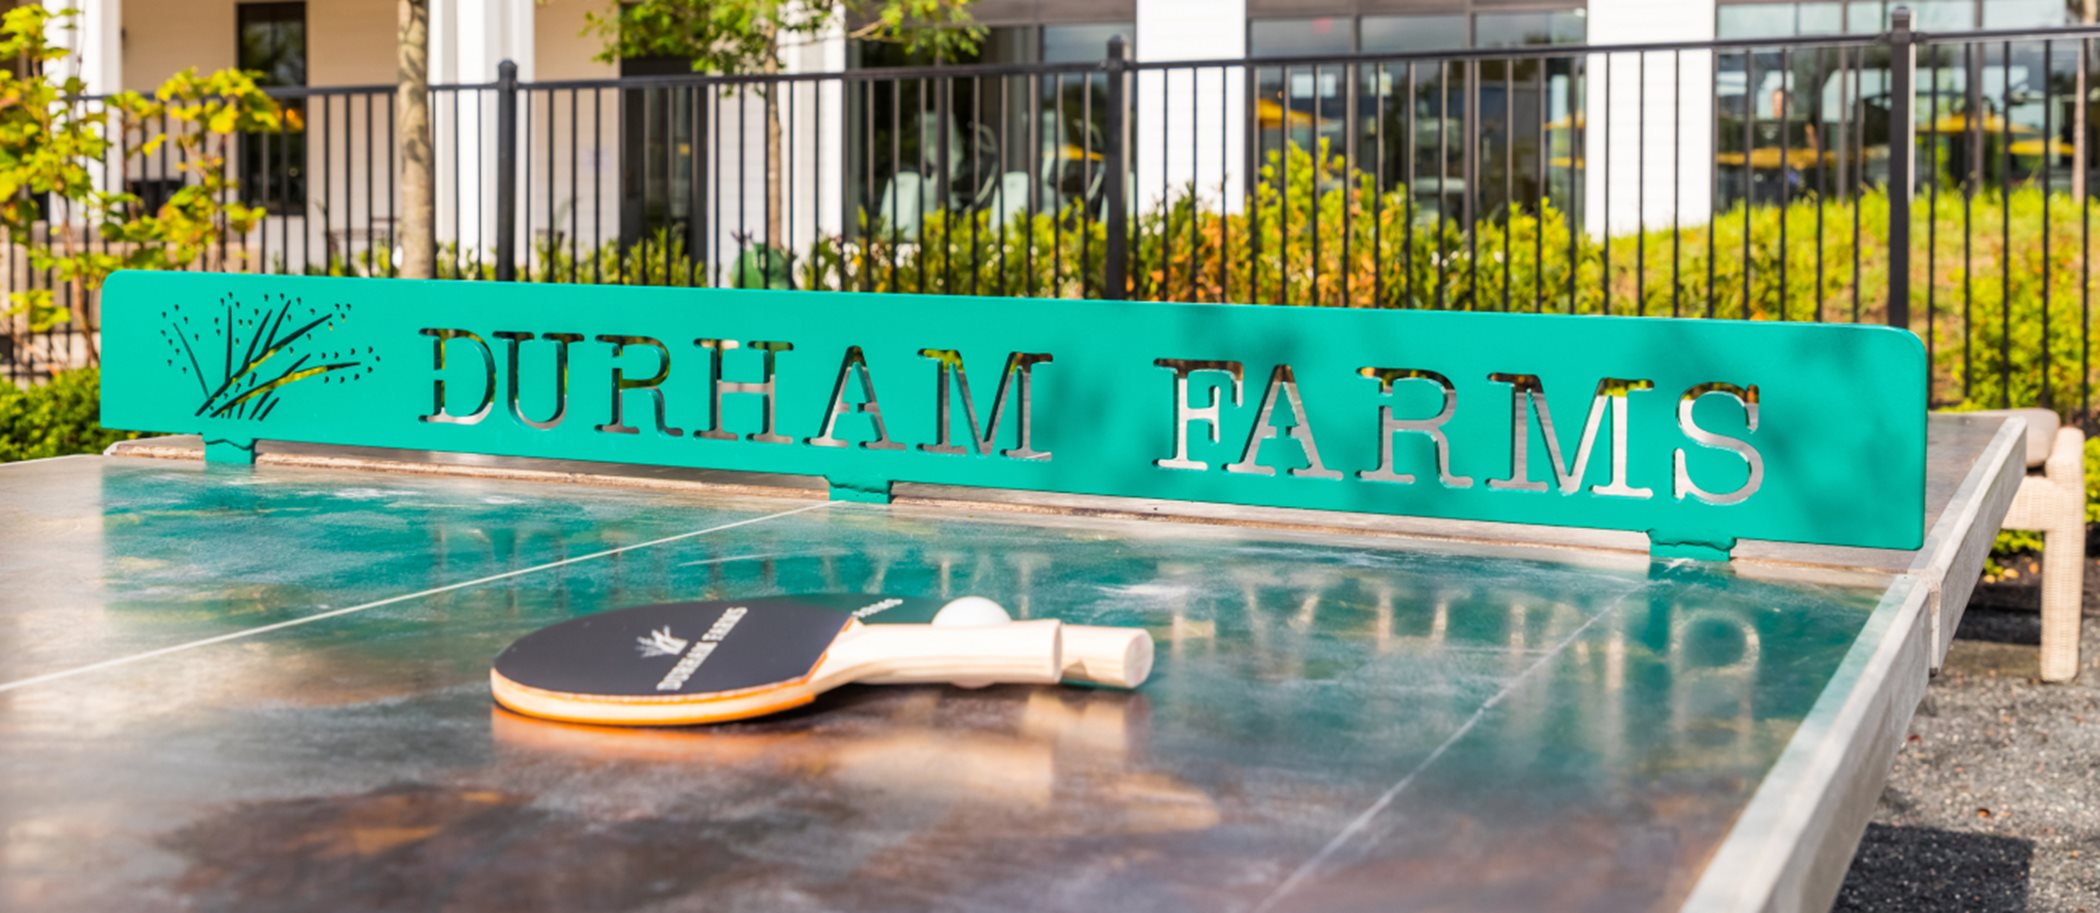 Durham Farms Ping Pong table